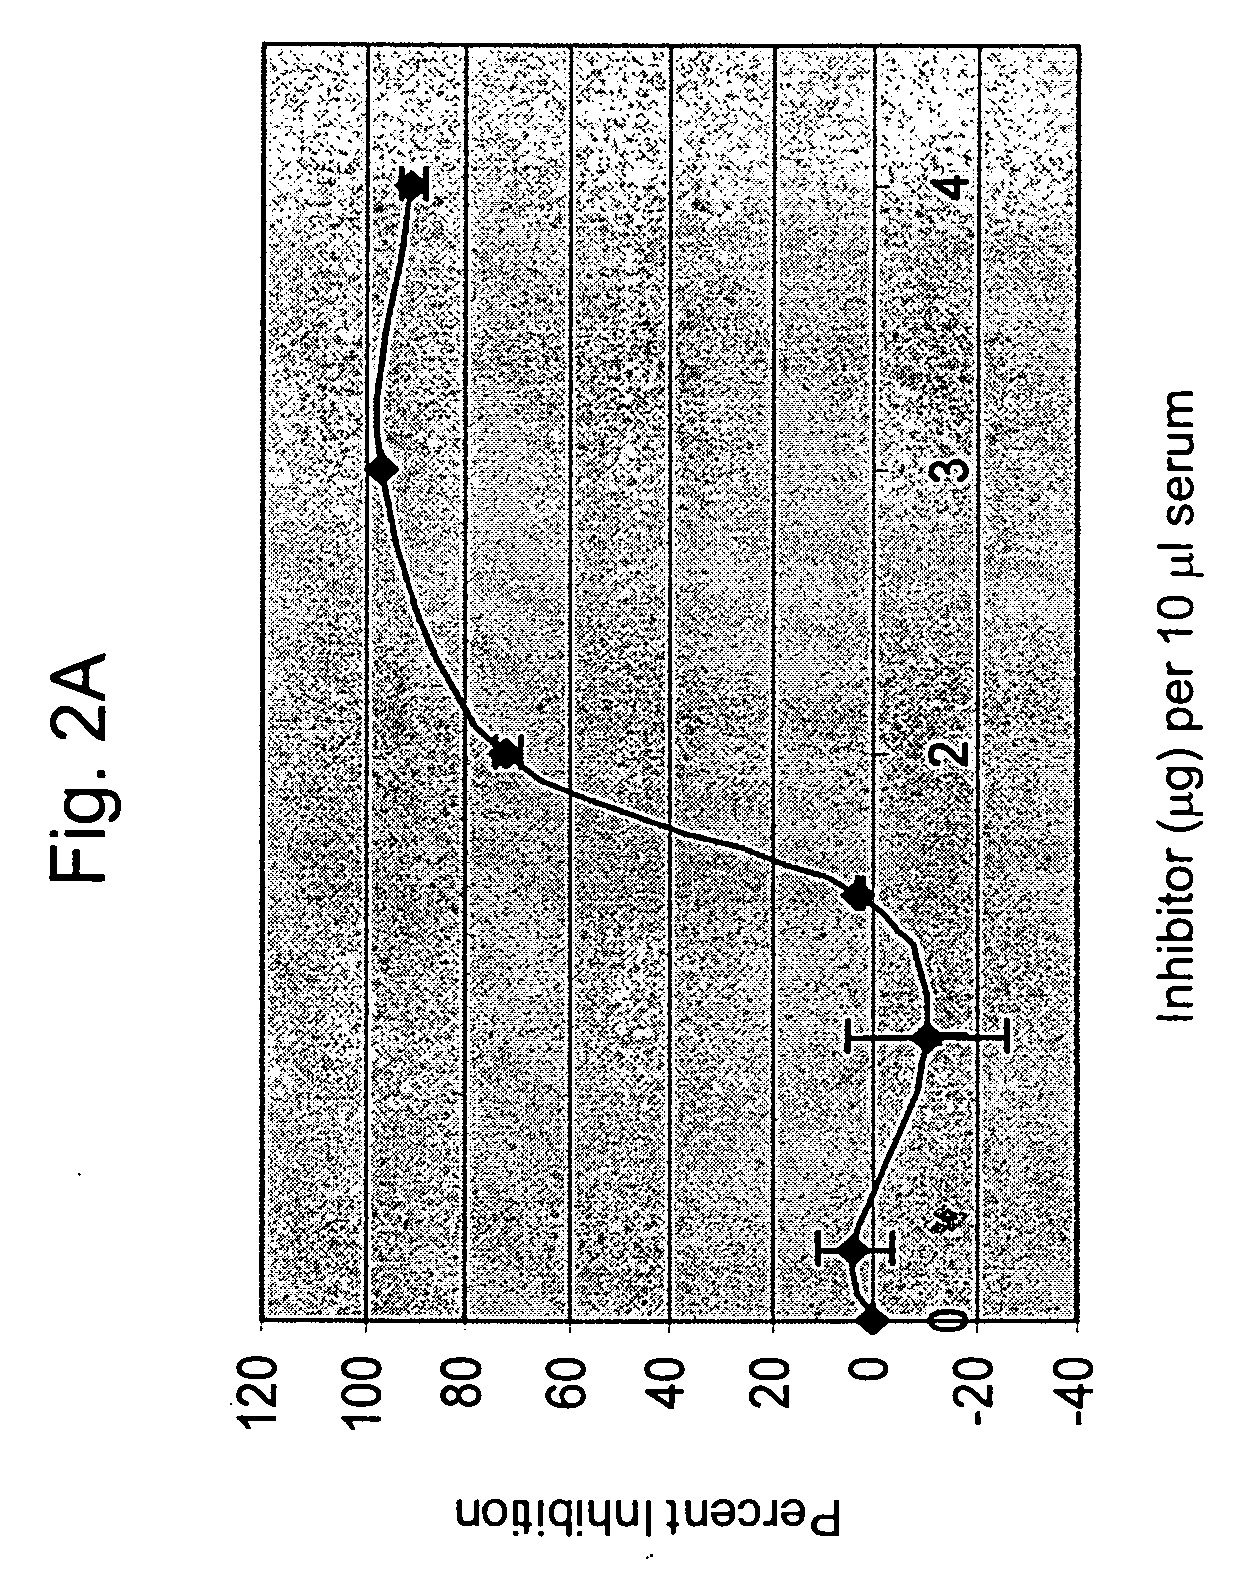 Inhibition of factor B, the alternative complement pathway and methods related thereto